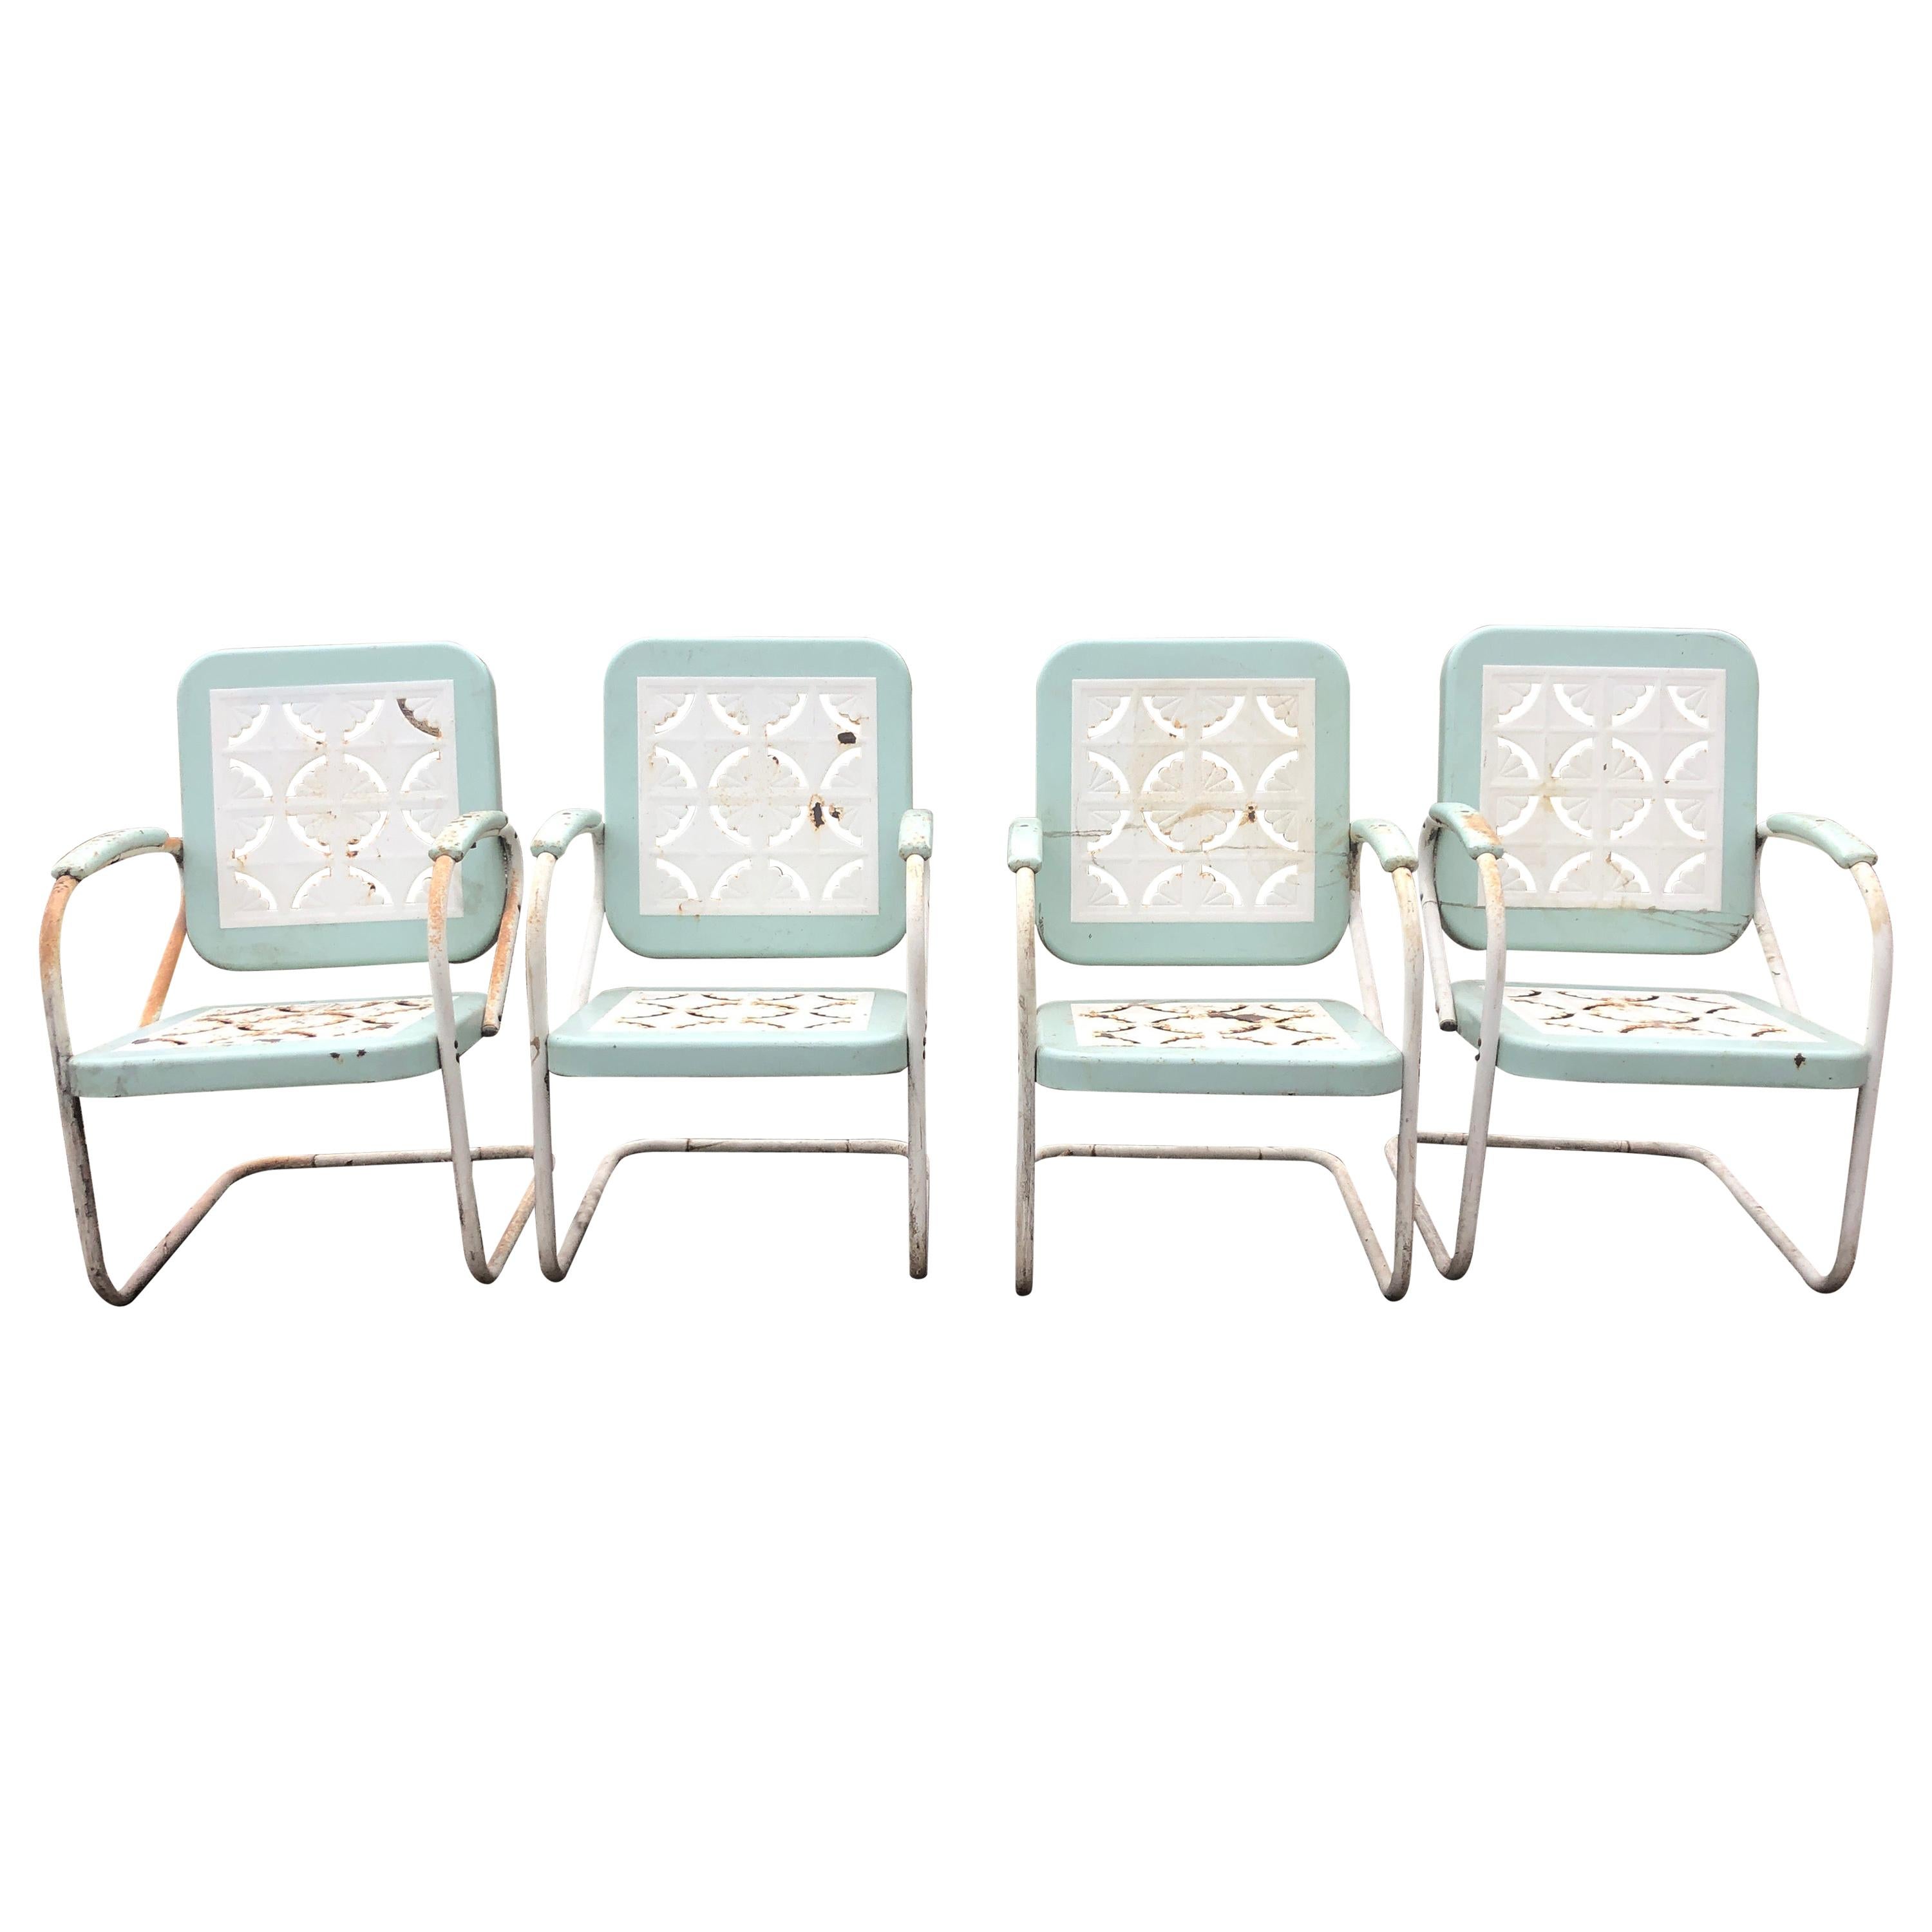 Charming Set of 4 Light Turquoise and White Country Patio Armchairs